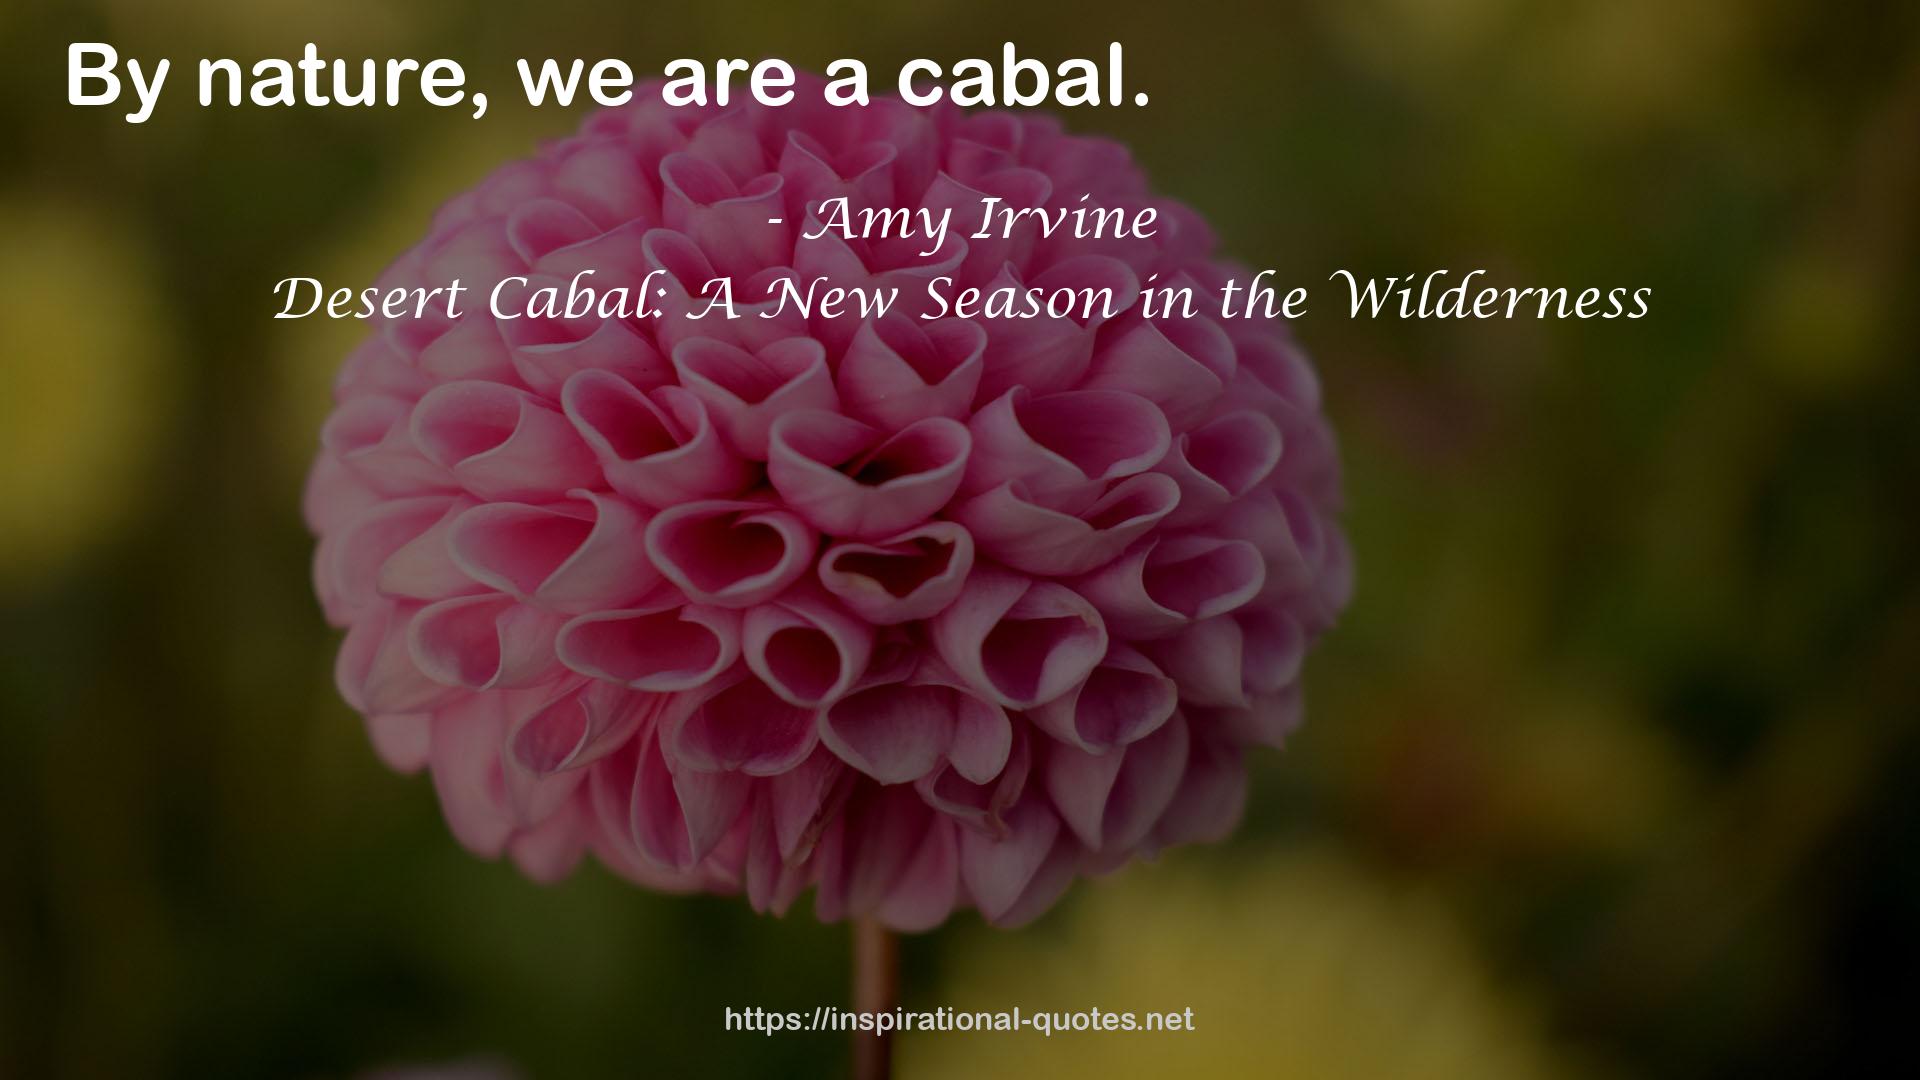 Desert Cabal: A New Season in the Wilderness QUOTES